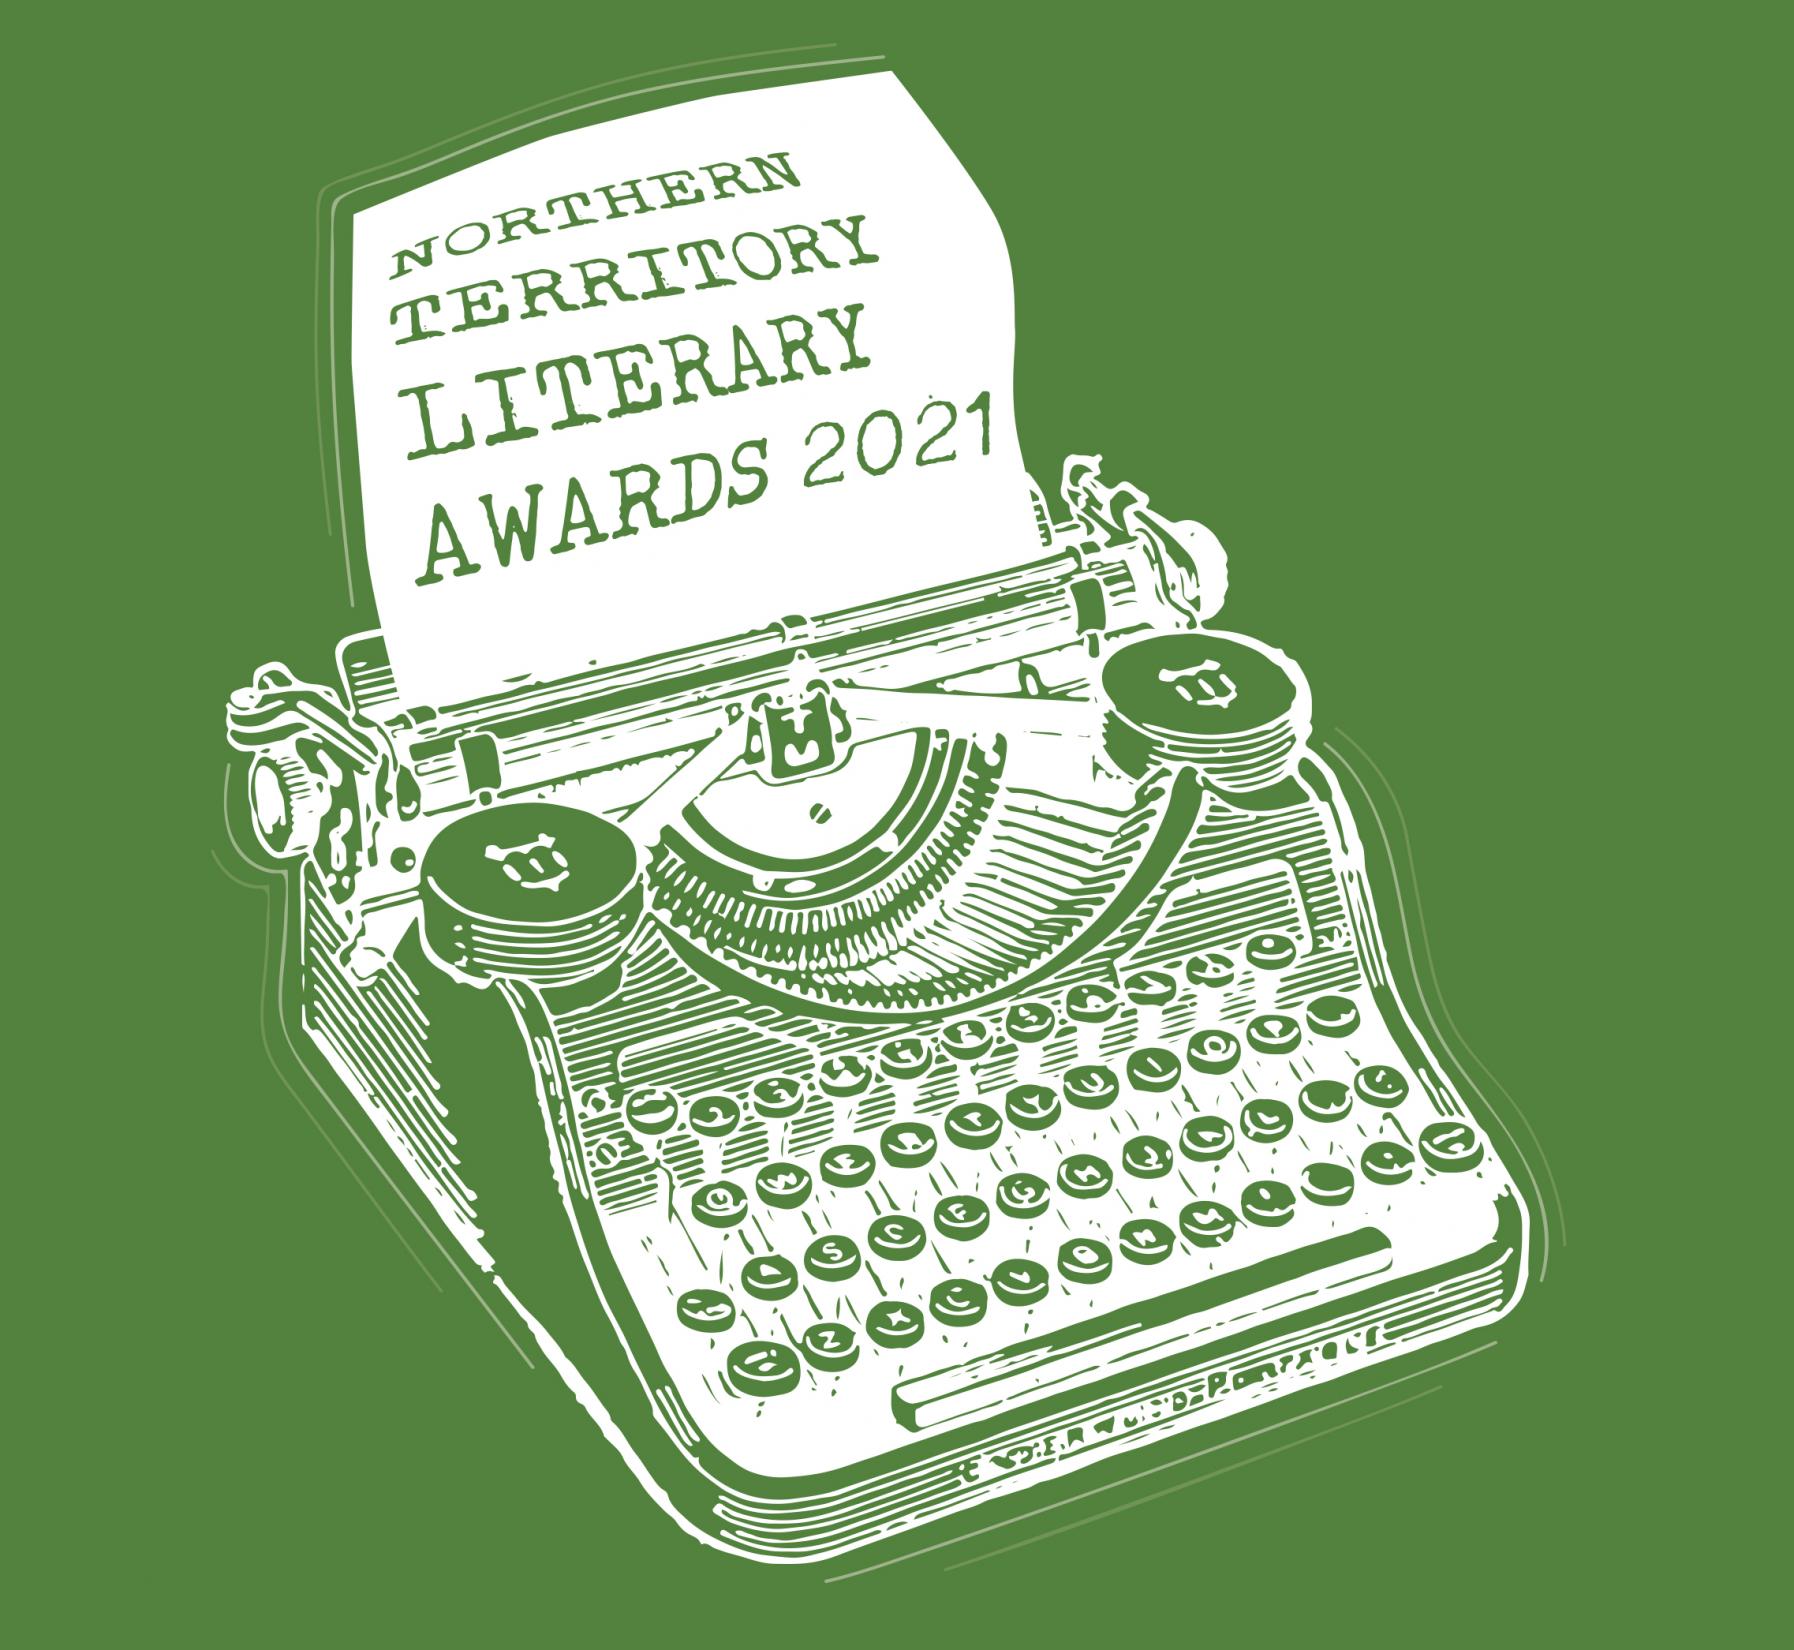 a typewriter with paper saying "Northern territory literary awards 2021" Awards Ceremony